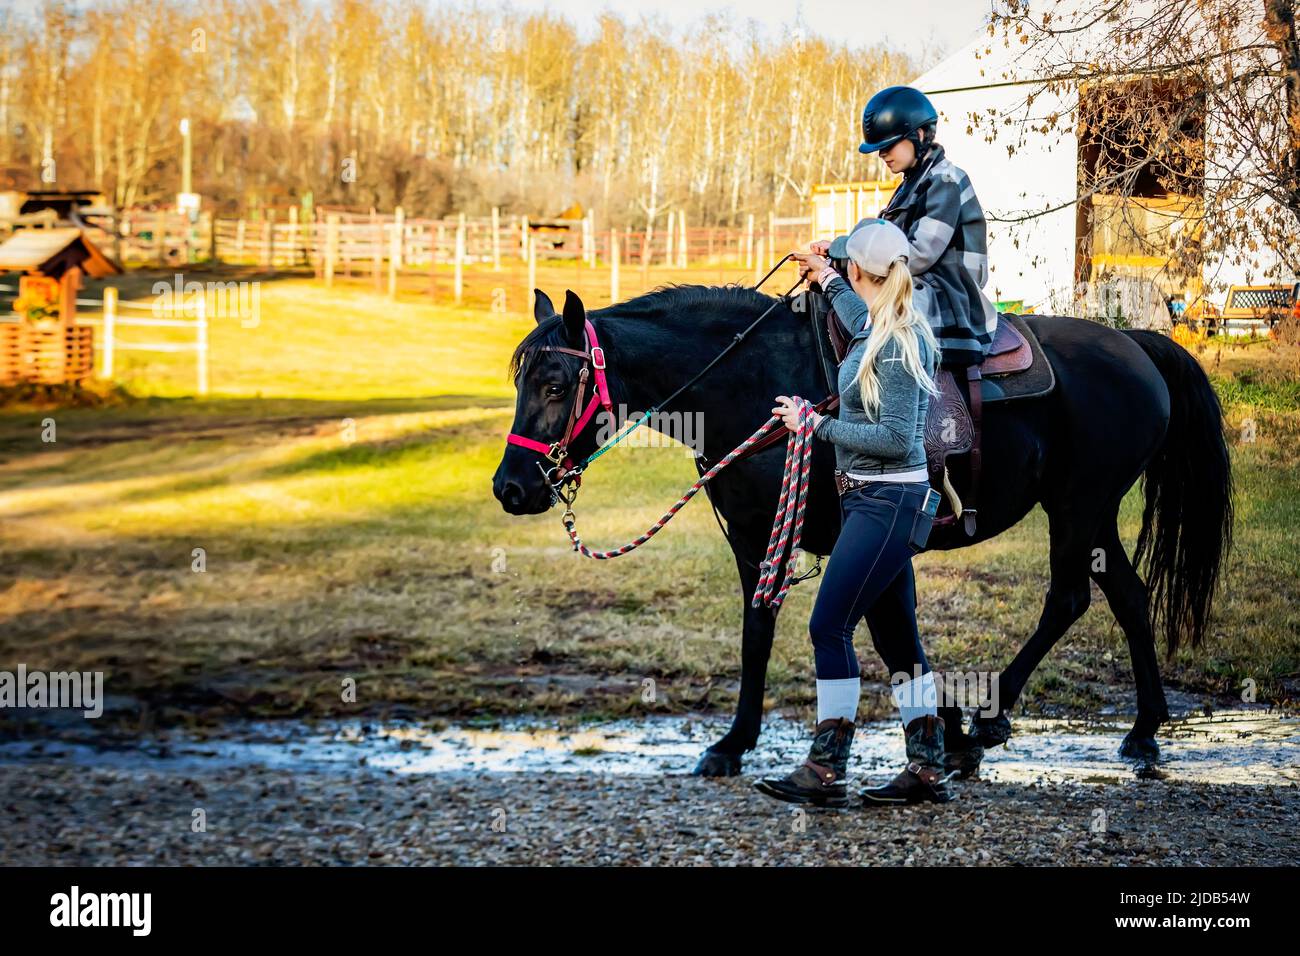 A young girl with Cerebral Palsy and her trainer working with a horse during a Hippotherapy session; Westlock, Alberta, Canada Stock Photo